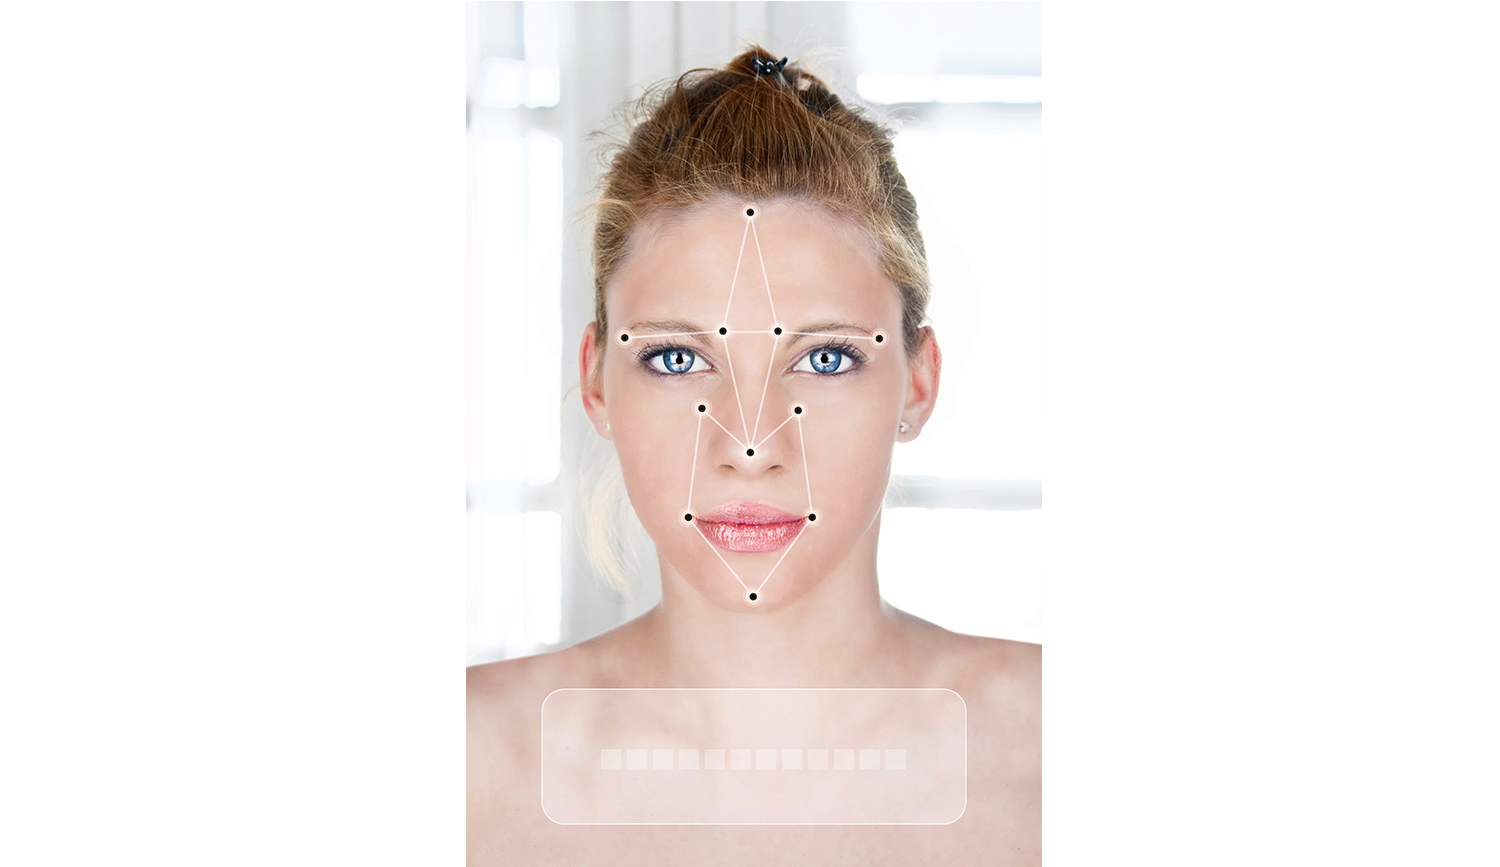 A picture of a woman's face overlaid with a facial recognition pattern.